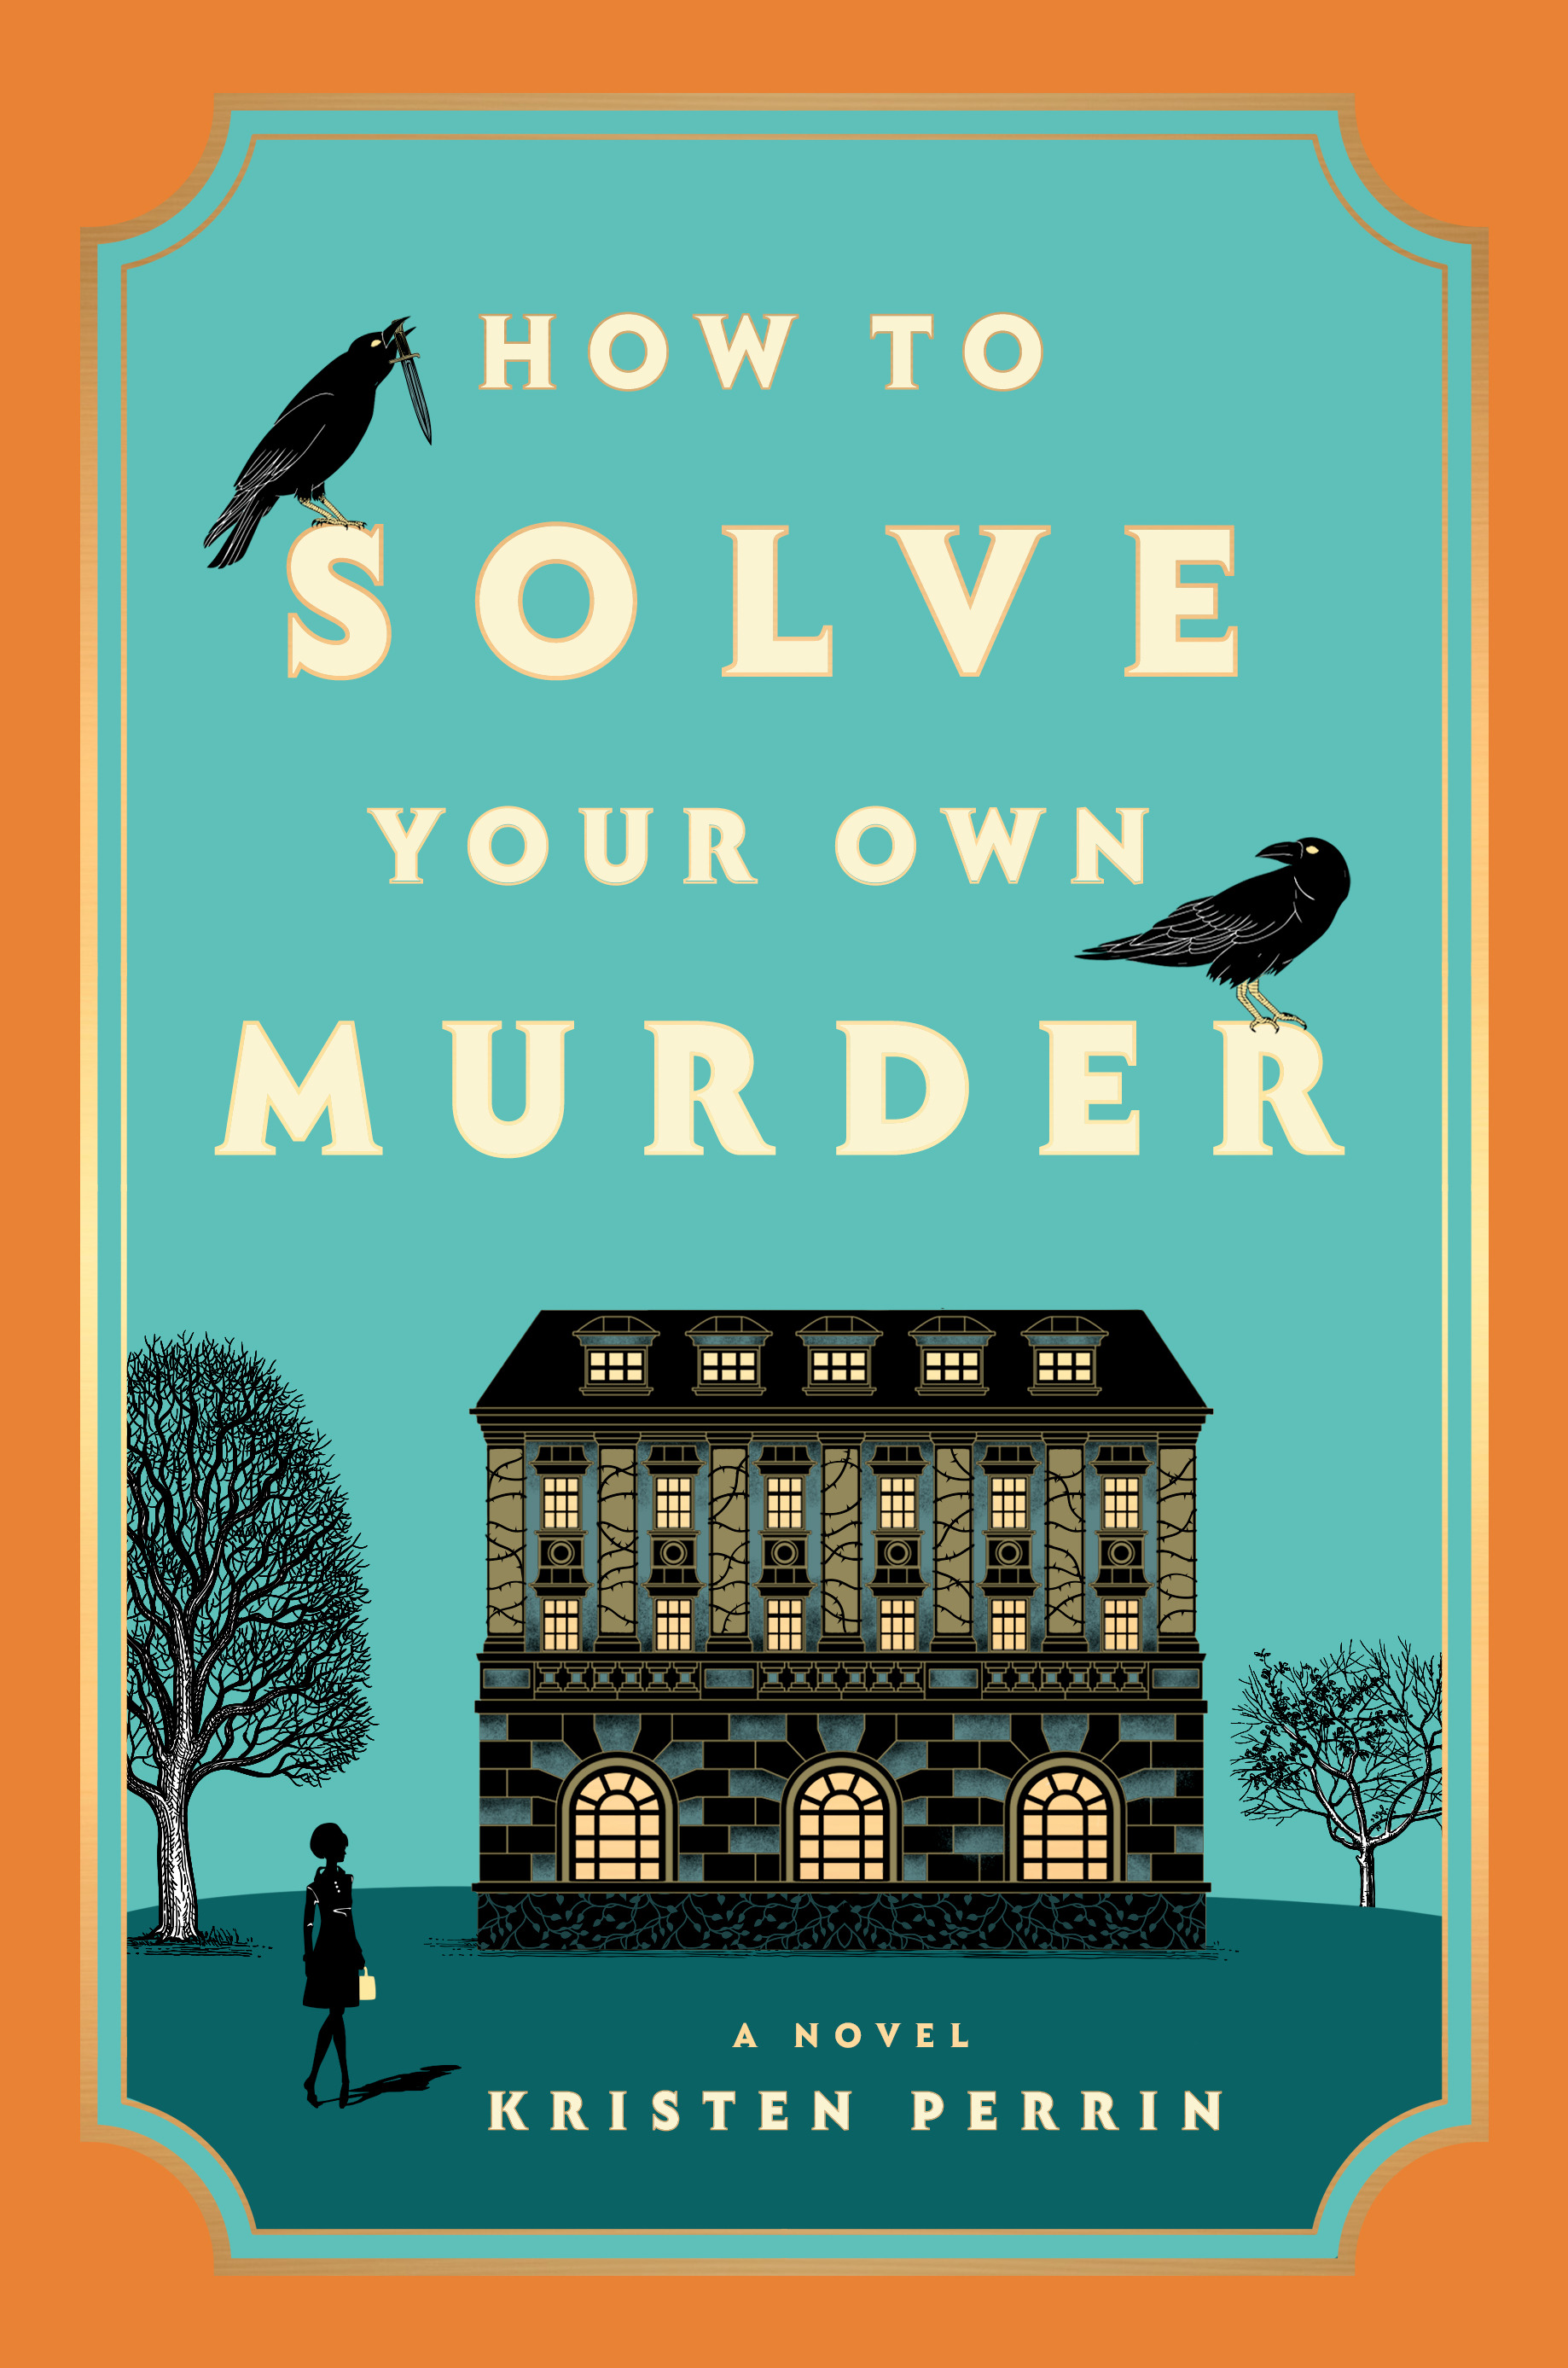 Book Cover: How to Solve Your Own Murder by Kristen Perrin